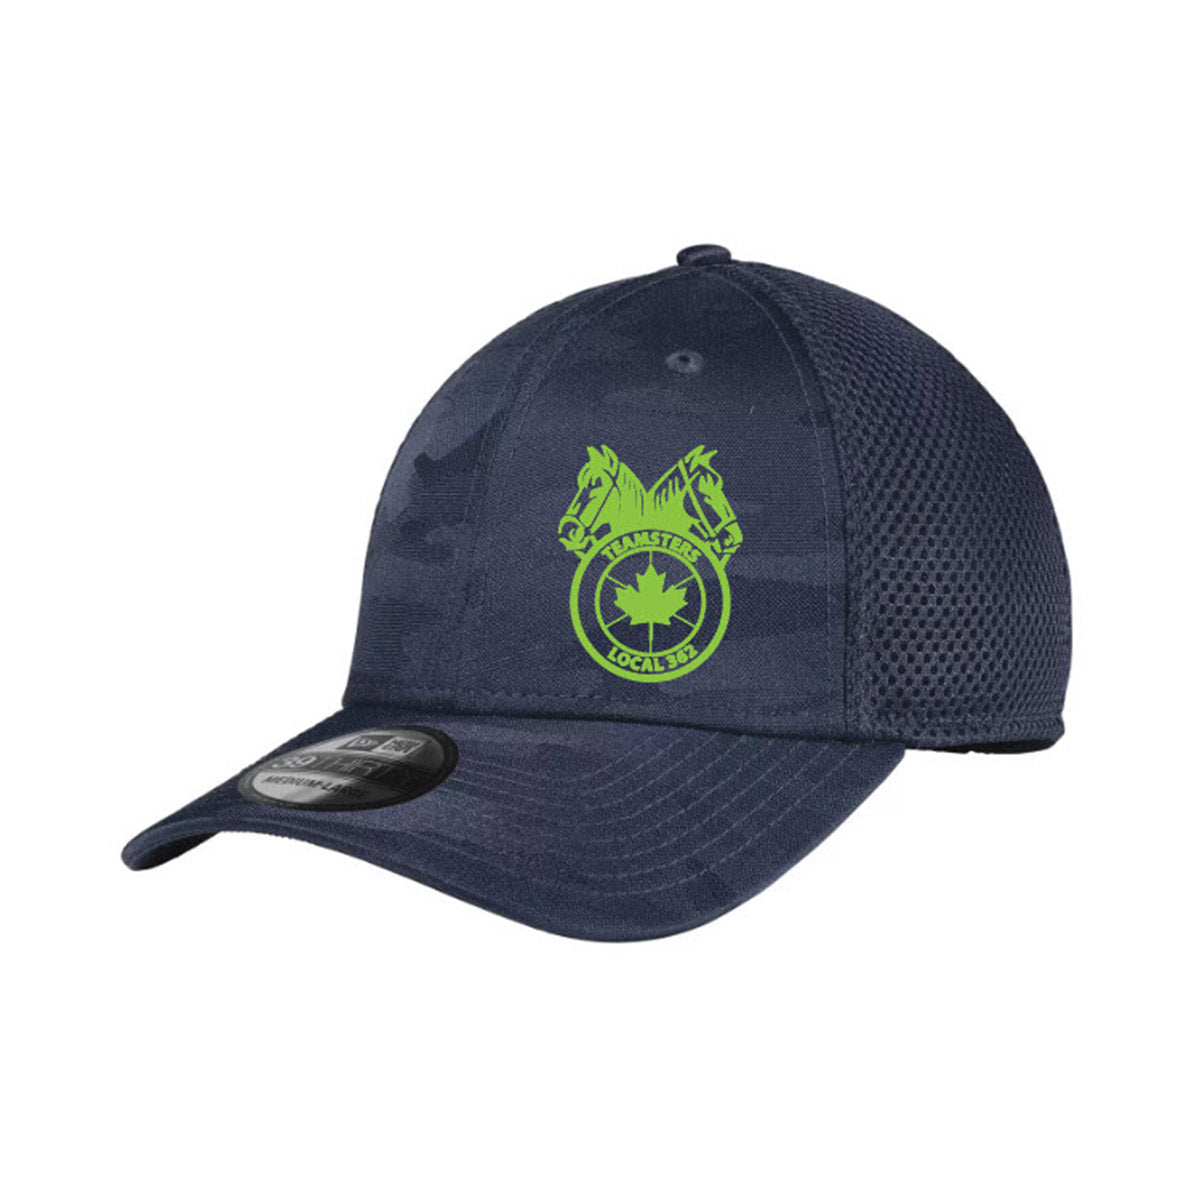 Teamsters 362 - Tonal Camo Cap - LIME GREEN Embroidery